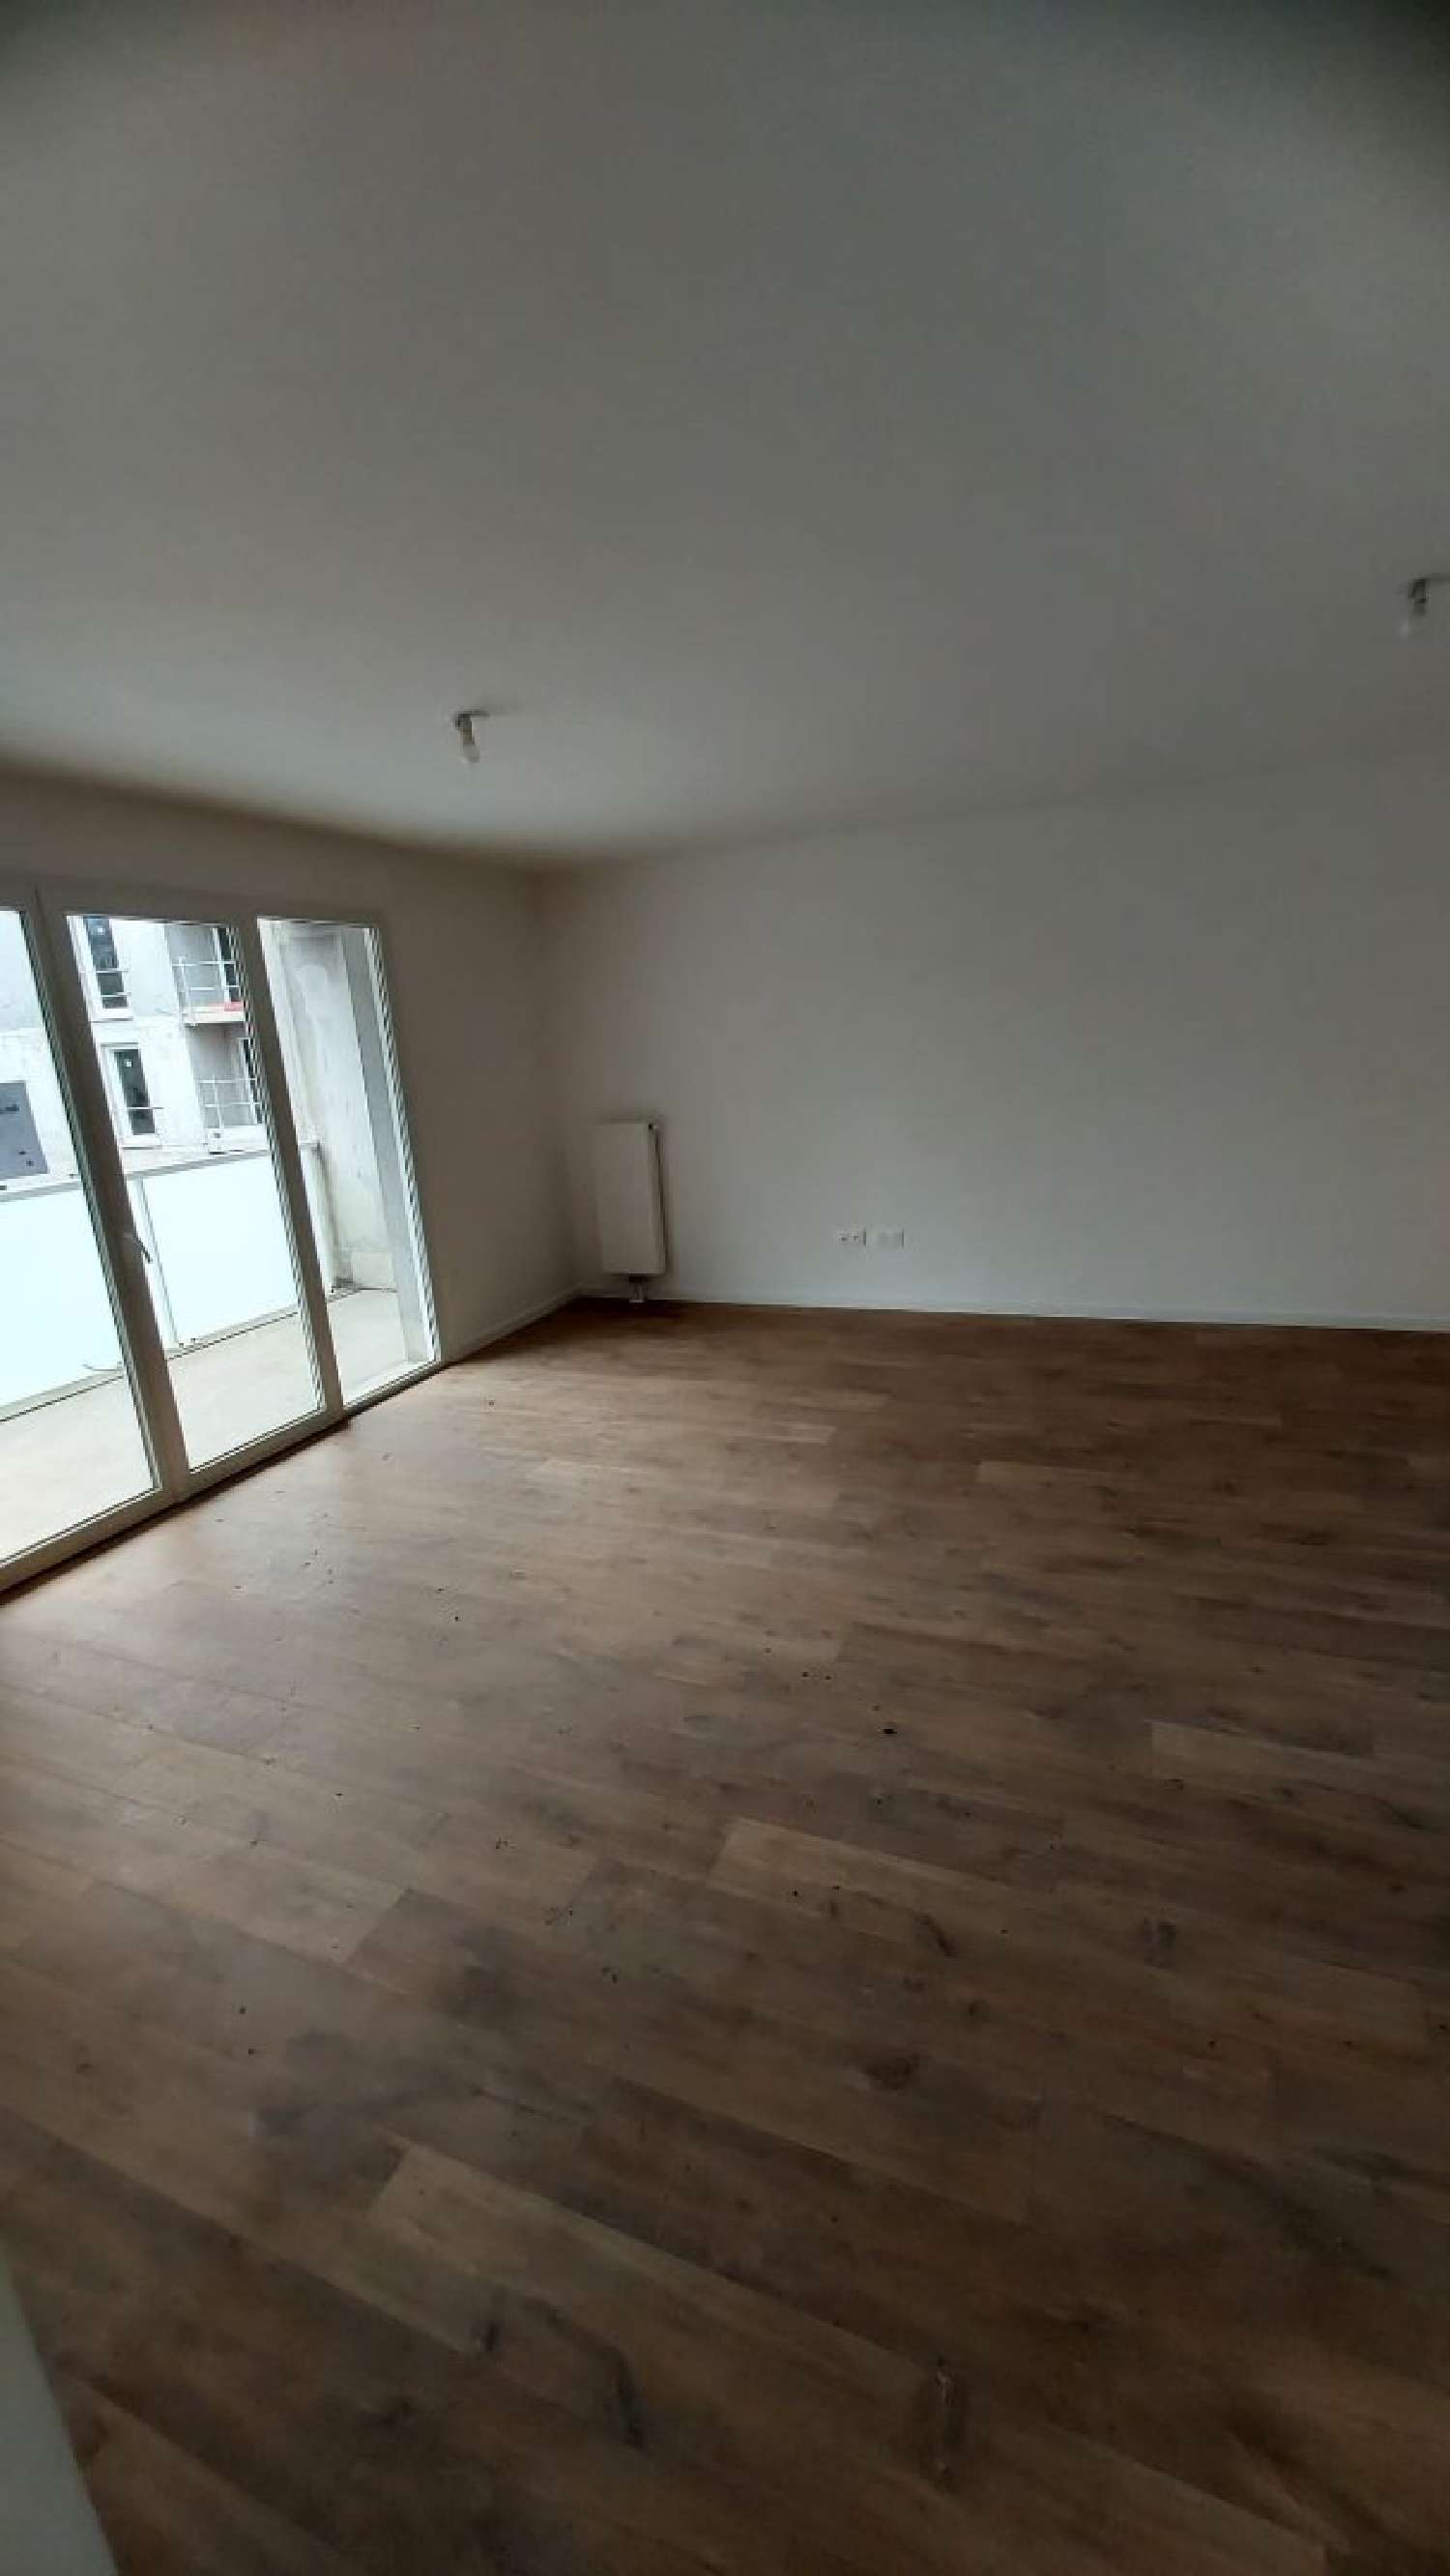  for sale apartment Tourcoing Nord 4